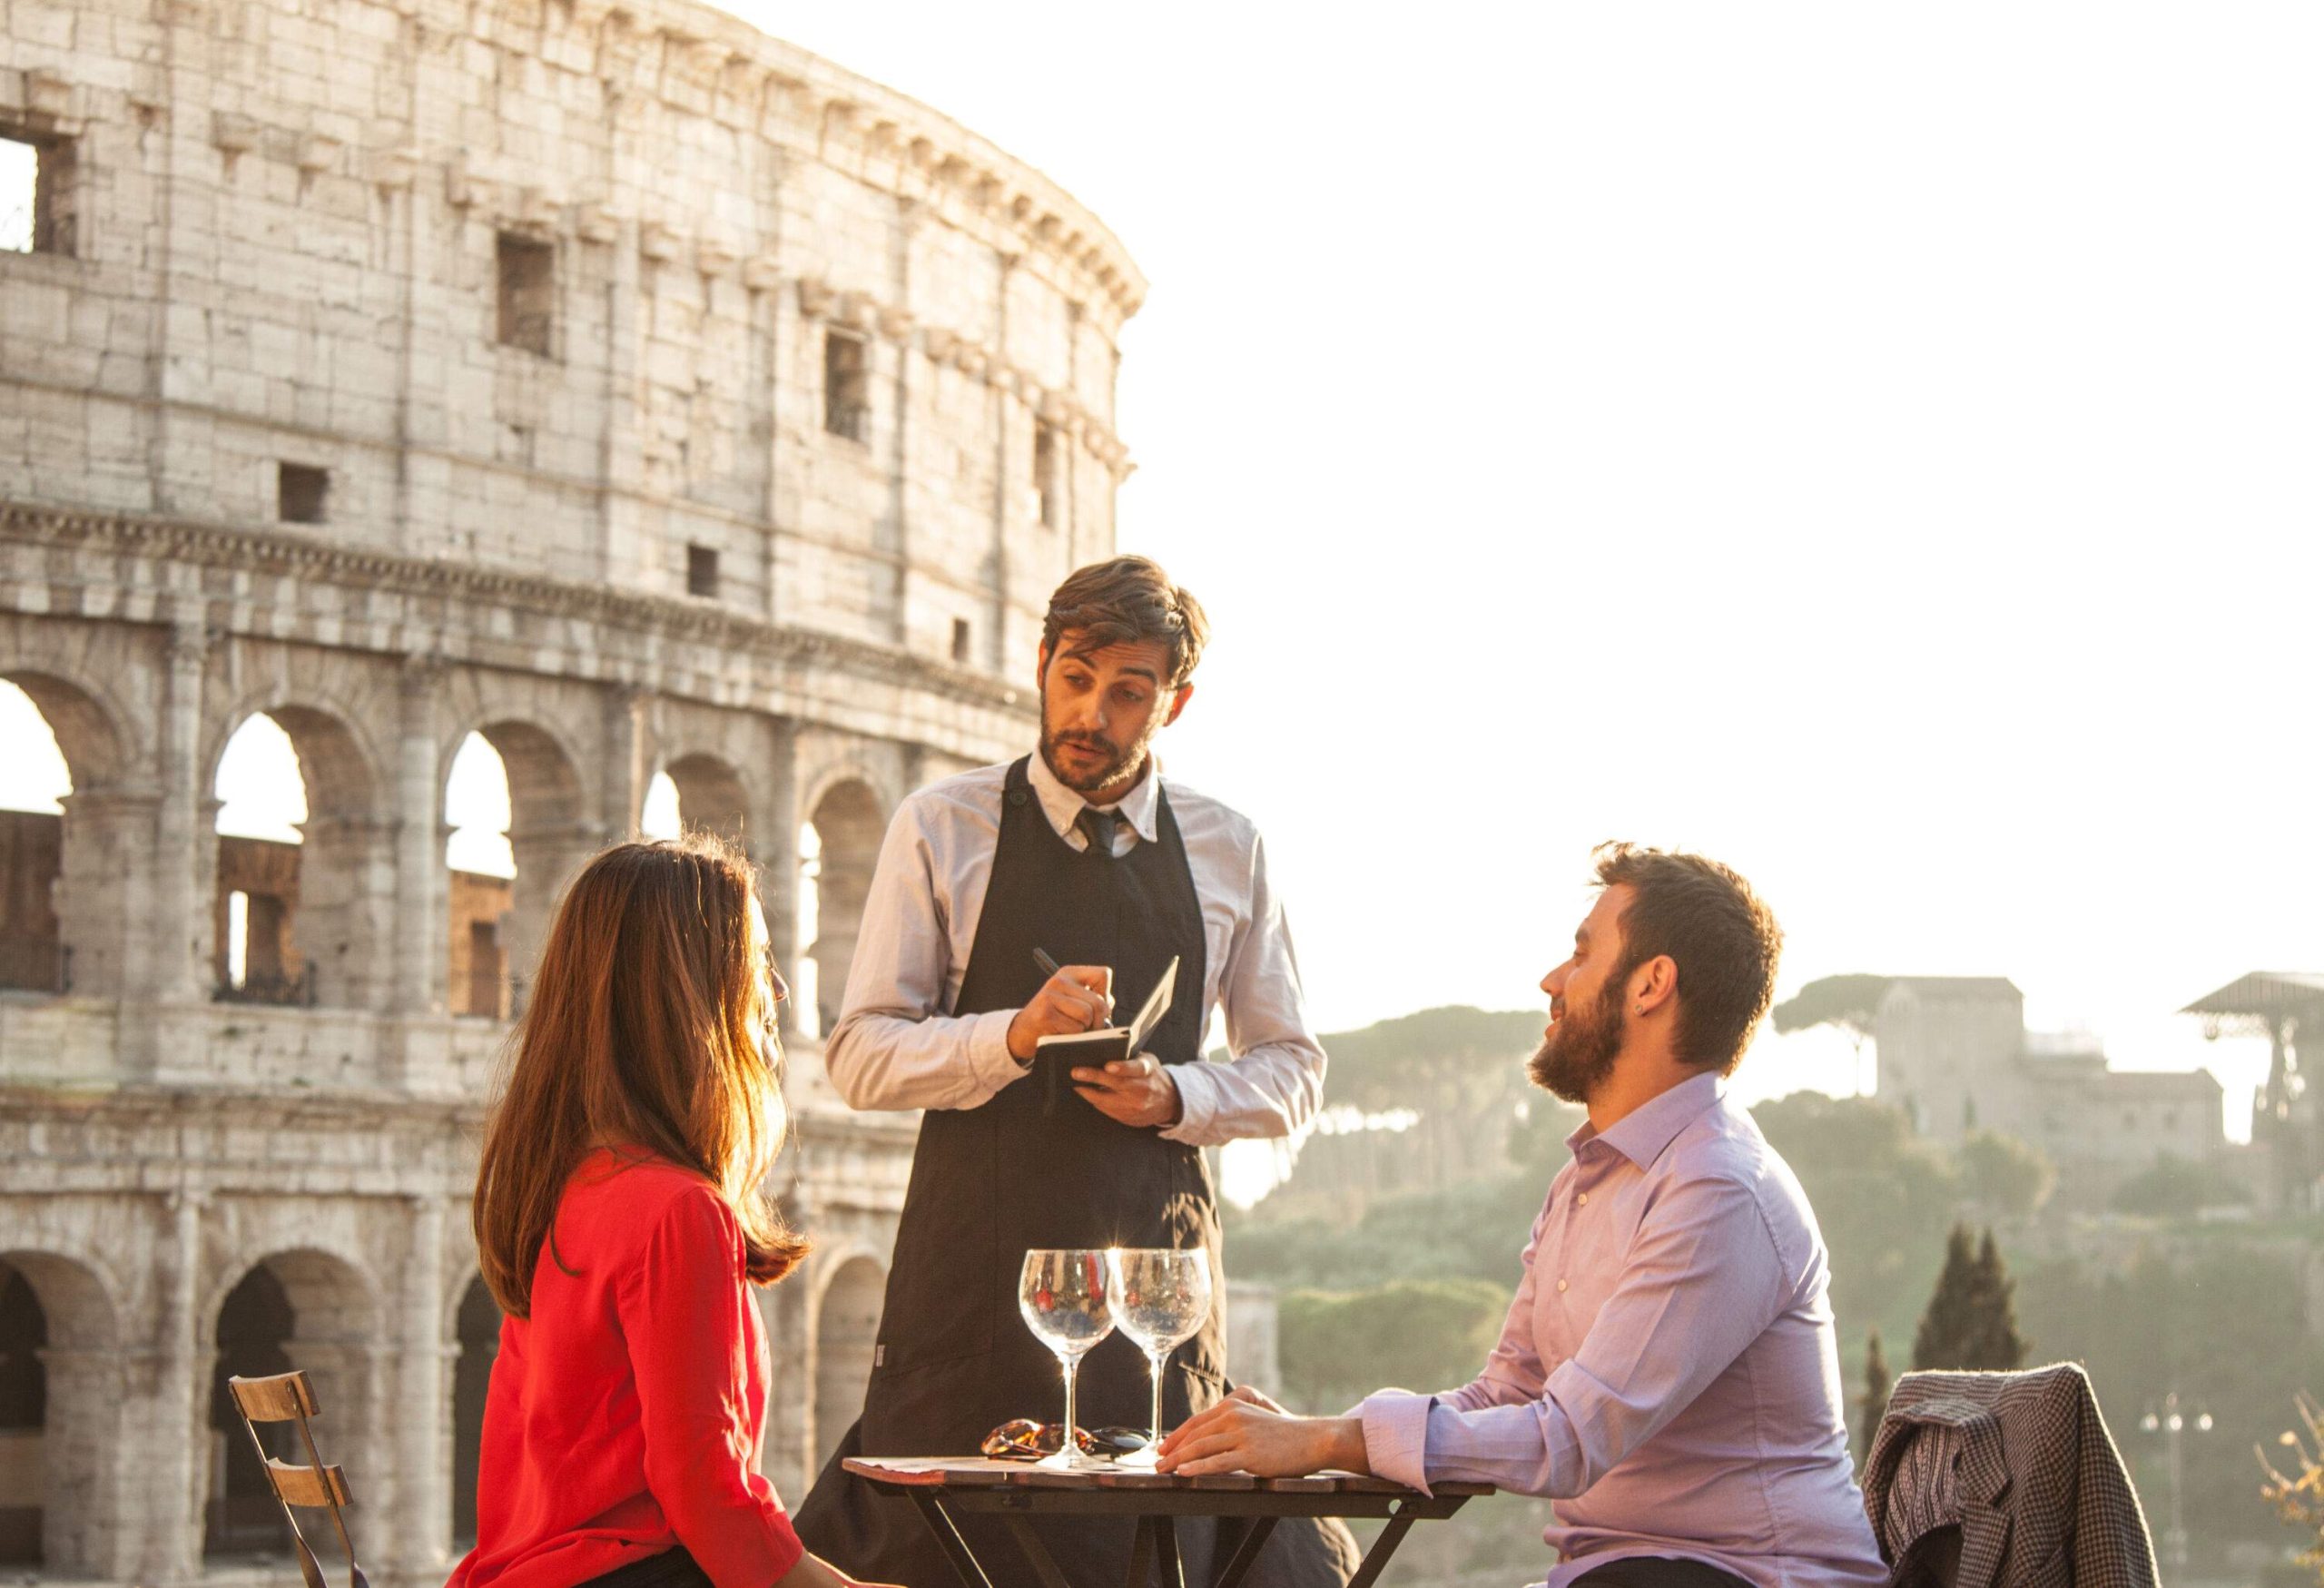 Two individual orders in a restaurant with the Roman Colosseum in the background.